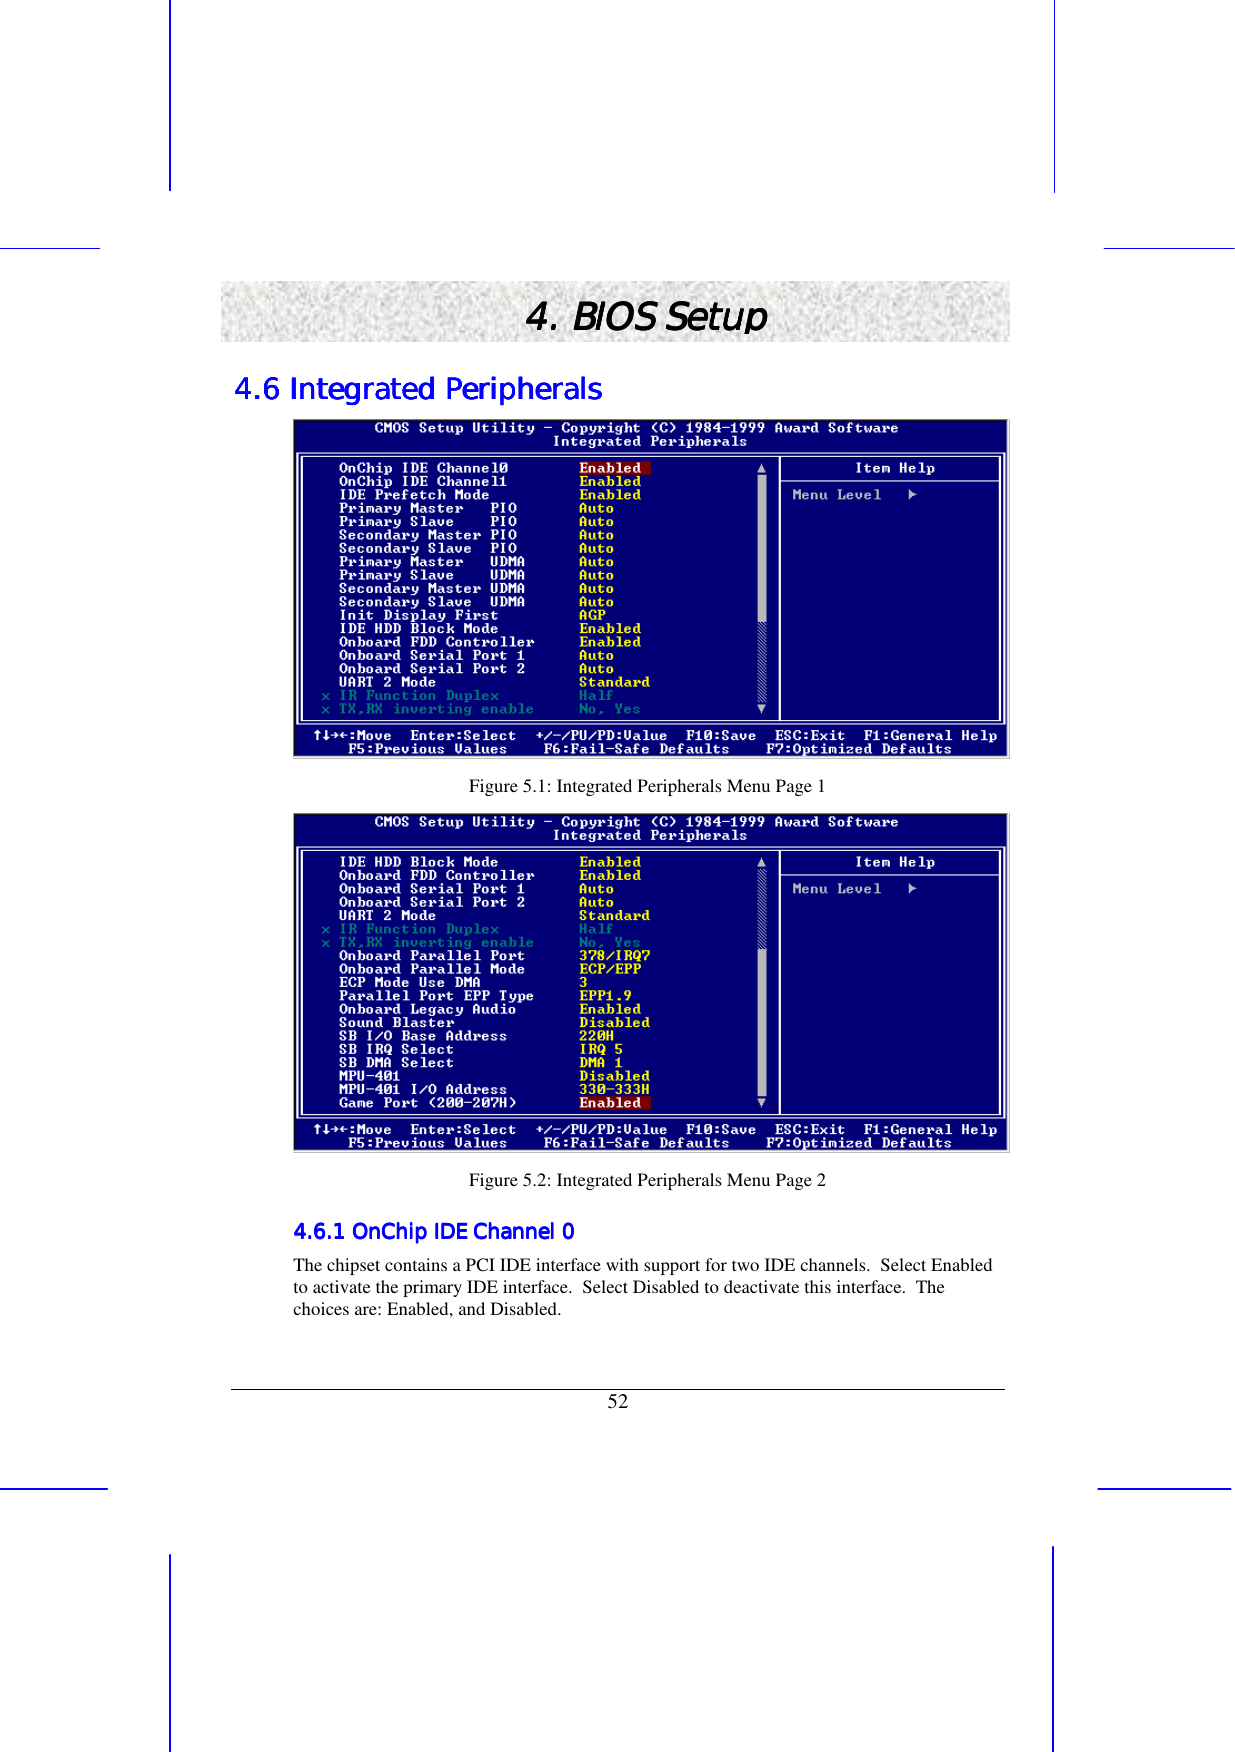   52 4. BIOS Setup4. BIOS Setup4. BIOS Setup4. BIOS Setup    4.6 Integrated Peripherals4.6 Integrated Peripherals4.6 Integrated Peripherals4.6 Integrated Peripherals     Figure 5.1: Integrated Peripherals Menu Page 1  Figure 5.2: Integrated Peripherals Menu Page 2 4.6.1 OnChip IDE Channel 04.6.1 OnChip IDE Channel 04.6.1 OnChip IDE Channel 04.6.1 OnChip IDE Channel 0    The chipset contains a PCI IDE interface with support for two IDE channels.  Select Enabled to activate the primary IDE interface.  Select Disabled to deactivate this interface.  The choices are: Enabled, and Disabled. 